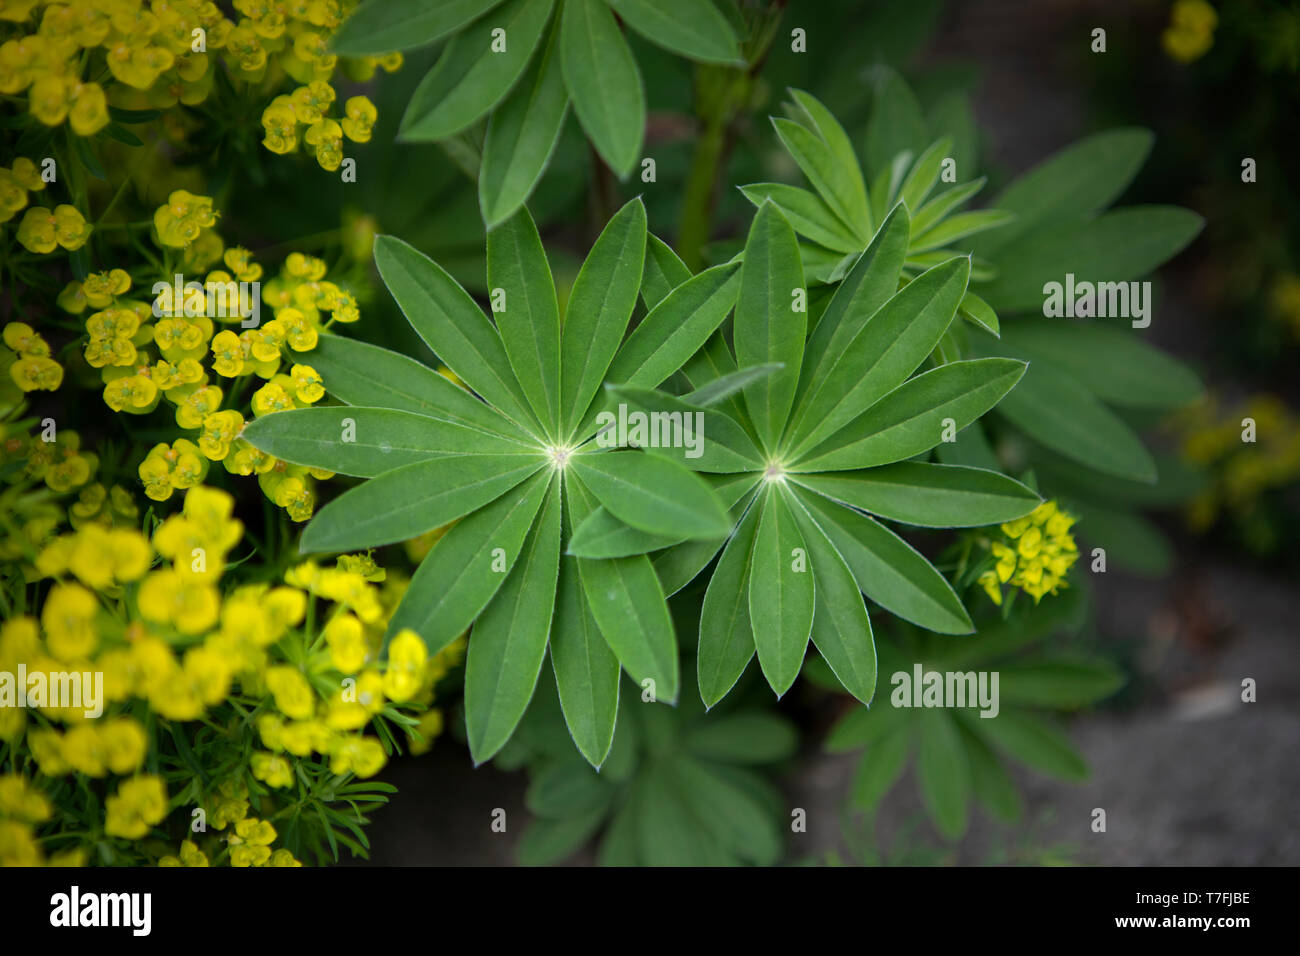 Two rosette shape lupin leaves and yellow tiny flowers. Abstract composition of plants in the garden. Leaves background. Shades of green. Stock Photo